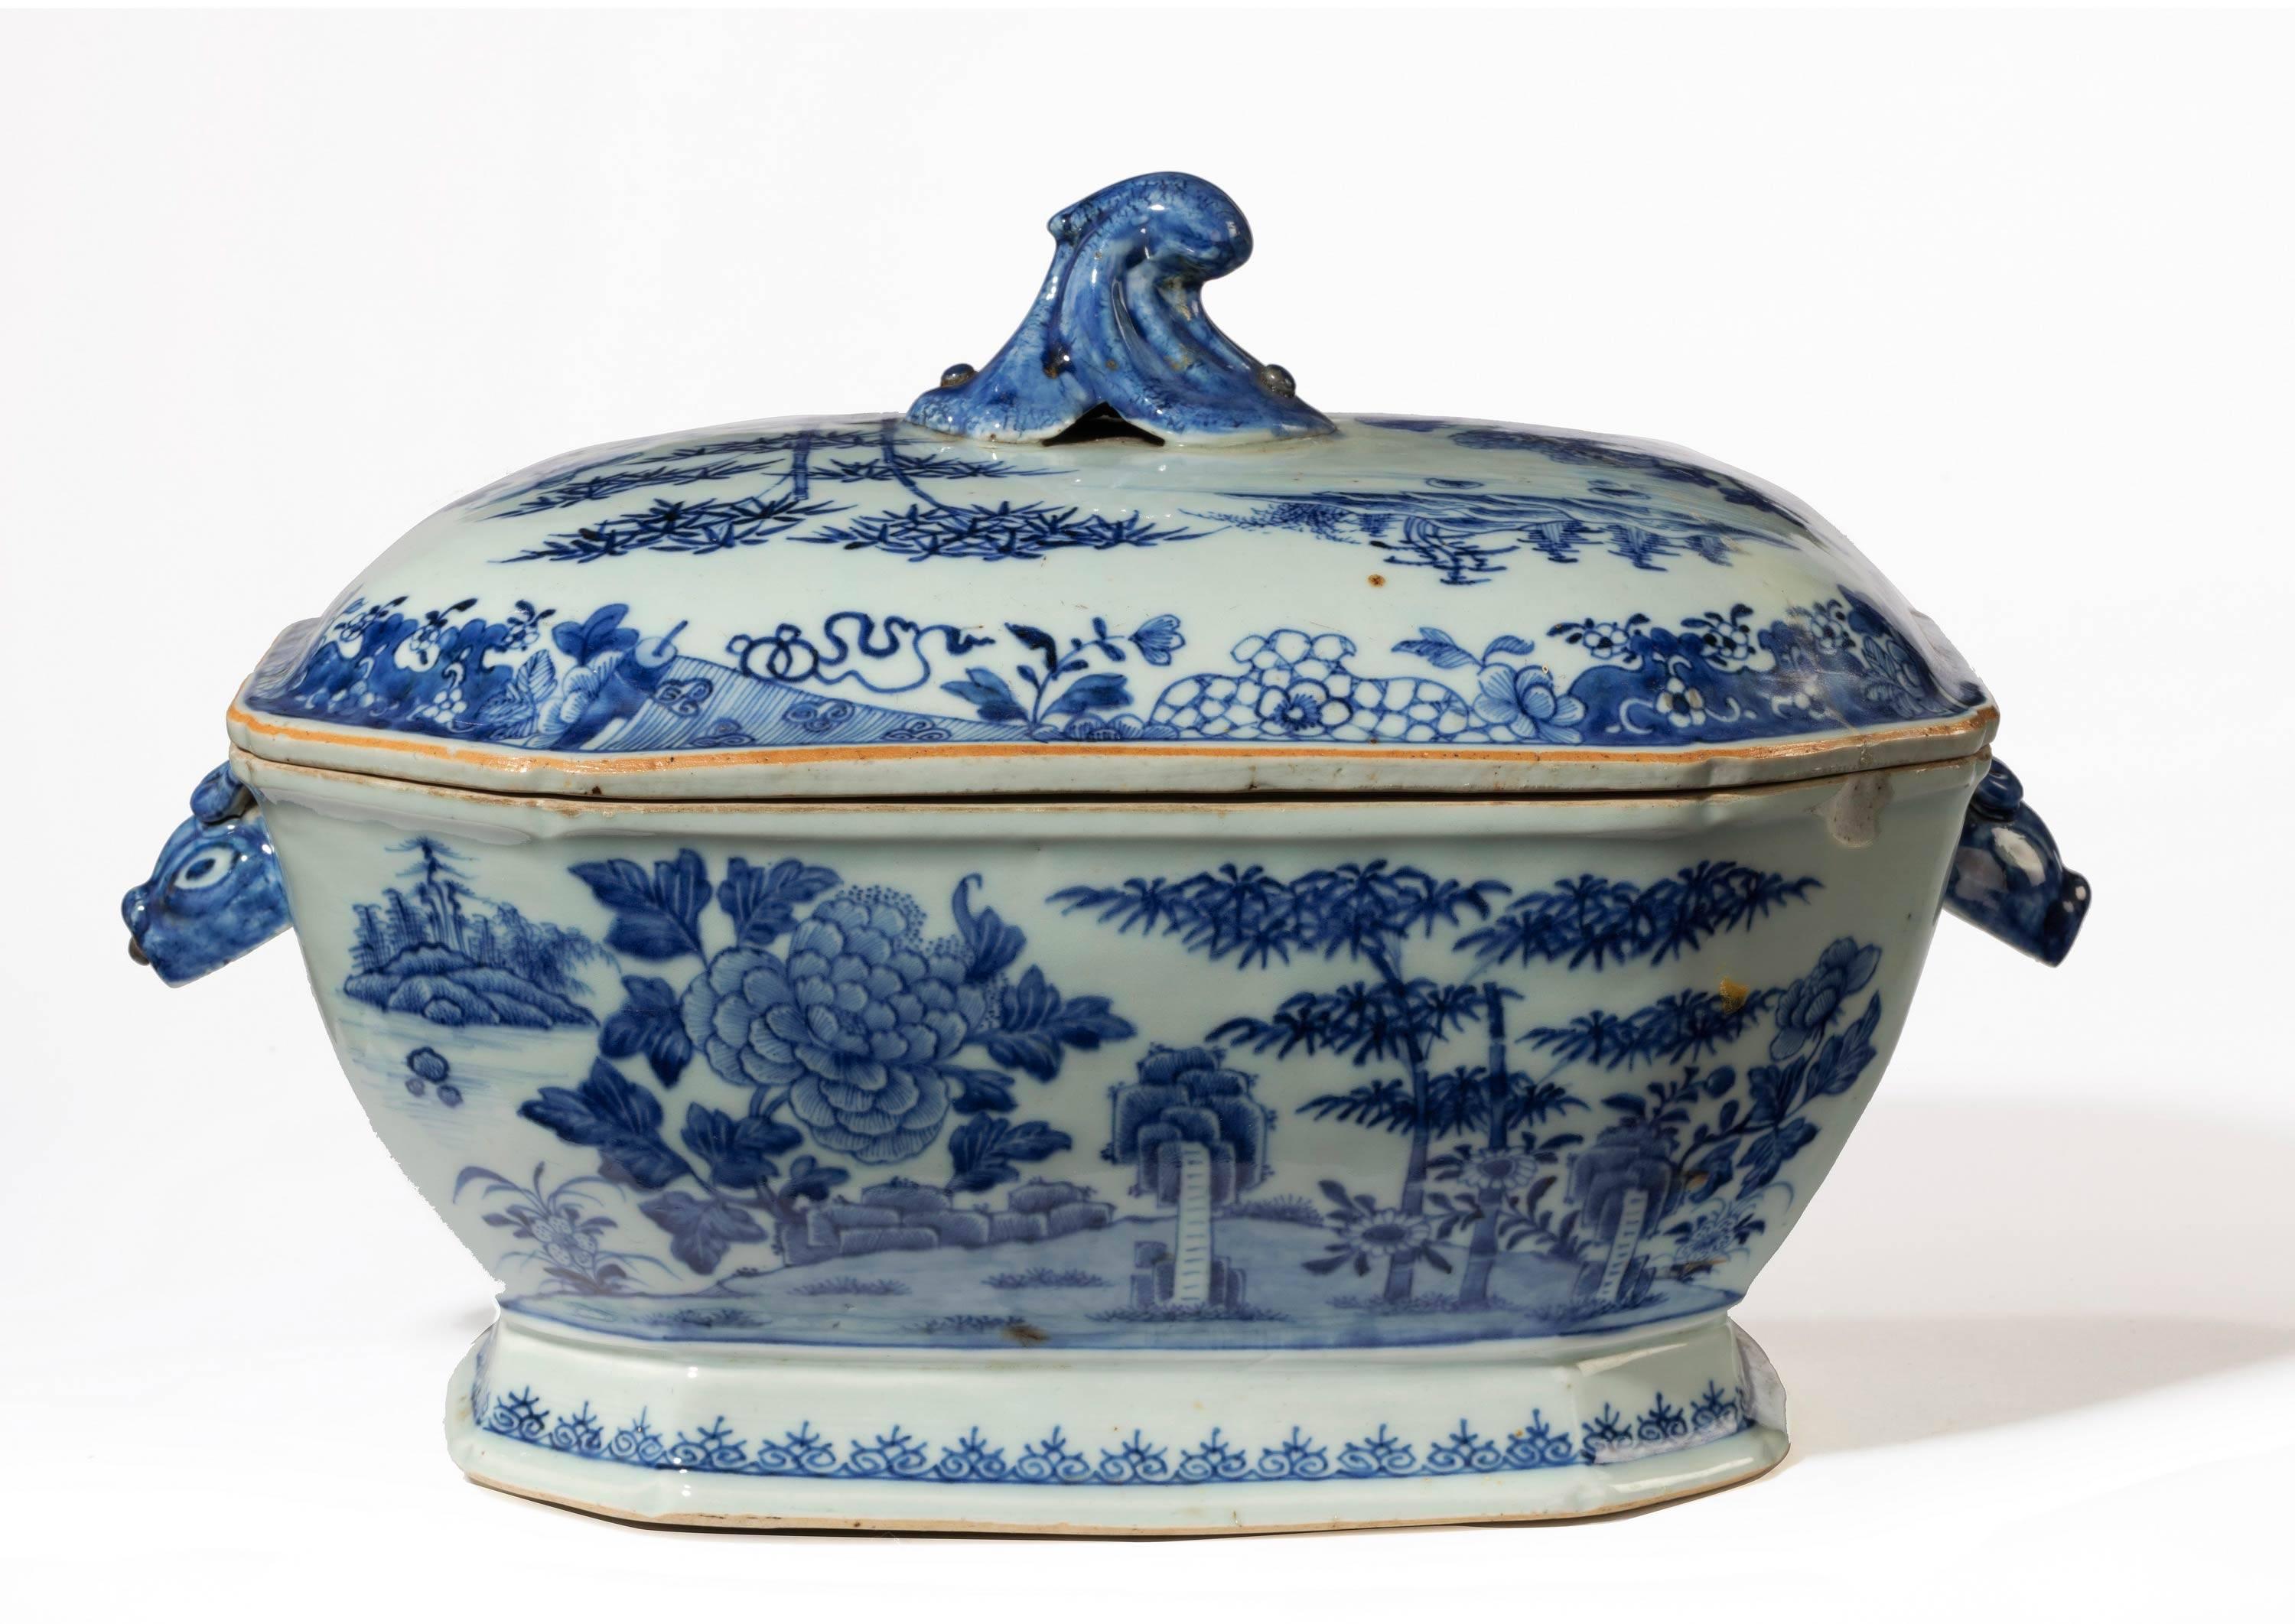 Late 18th century Chinese blue and white soup tureen. The lid with restorations but virtually invisible. One of the mask handles dated. With some restoration.